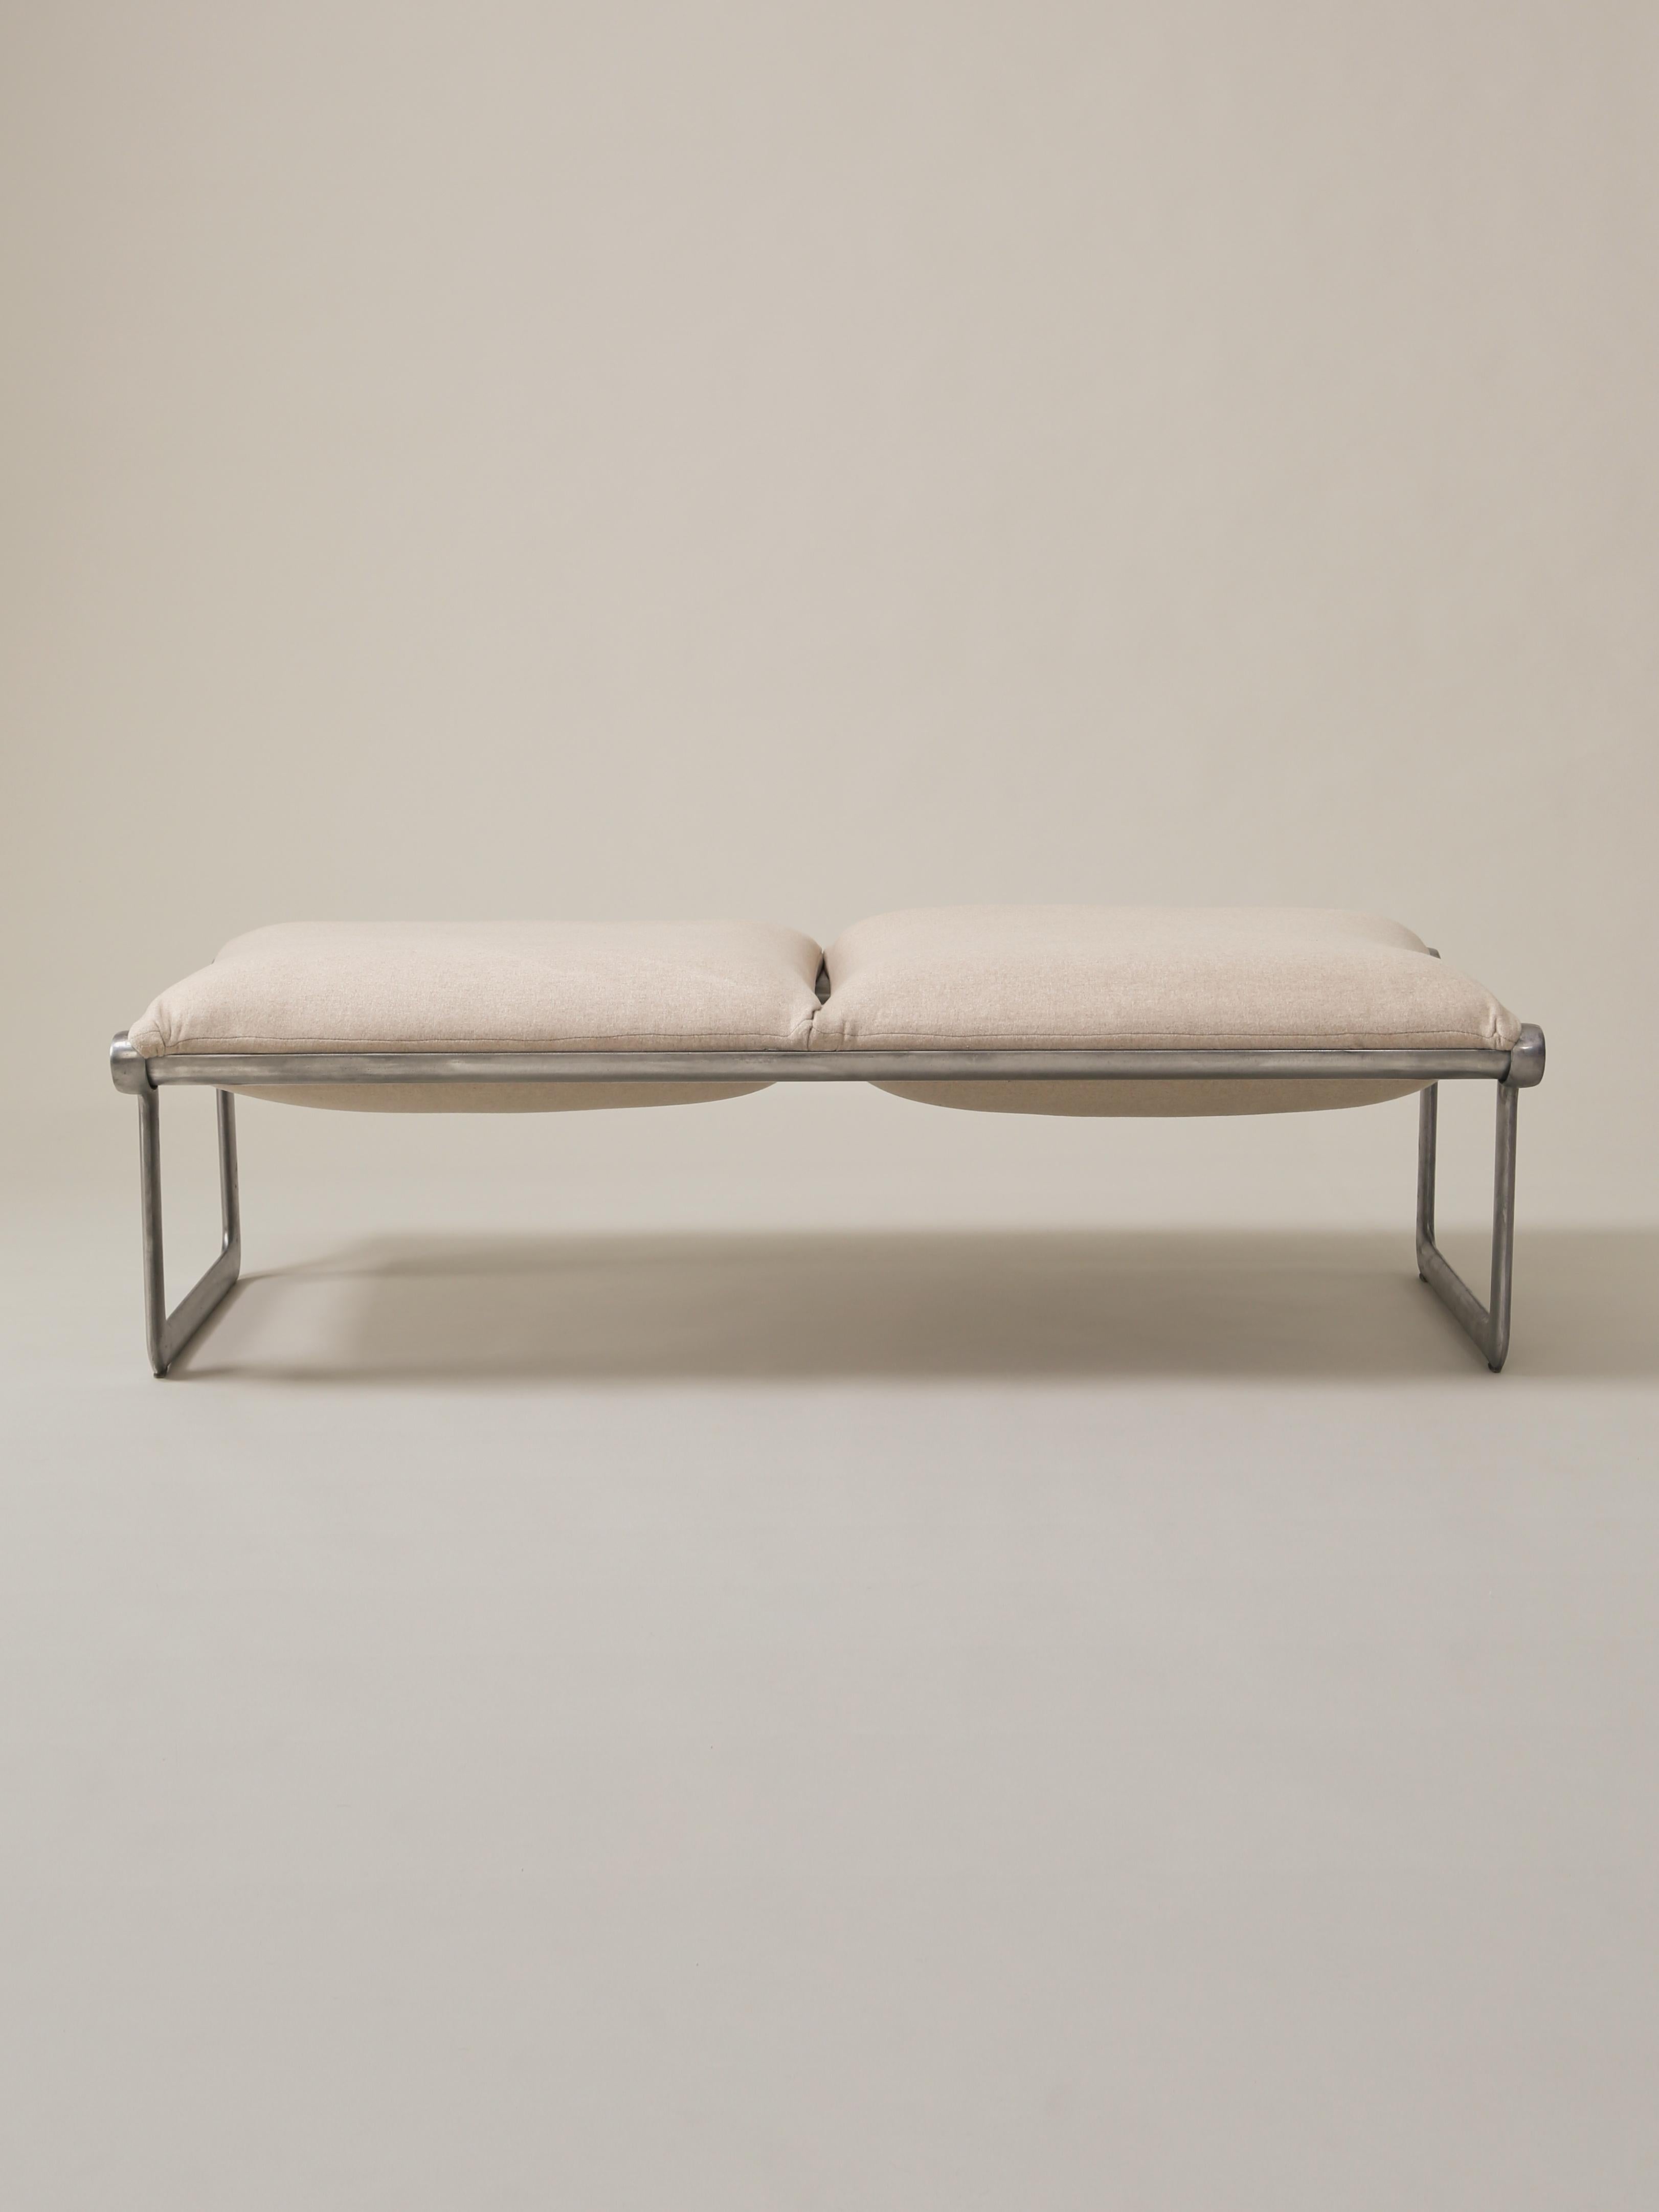 This Mid-Century Modern sling bench, designed by Bruce Hannah and Andrew Morrison for Knoll during the 1970s, features two seats, reupholstered in a bone cashmere. The steel base is original.

Measures: Overall width: 55”
Overall depth: